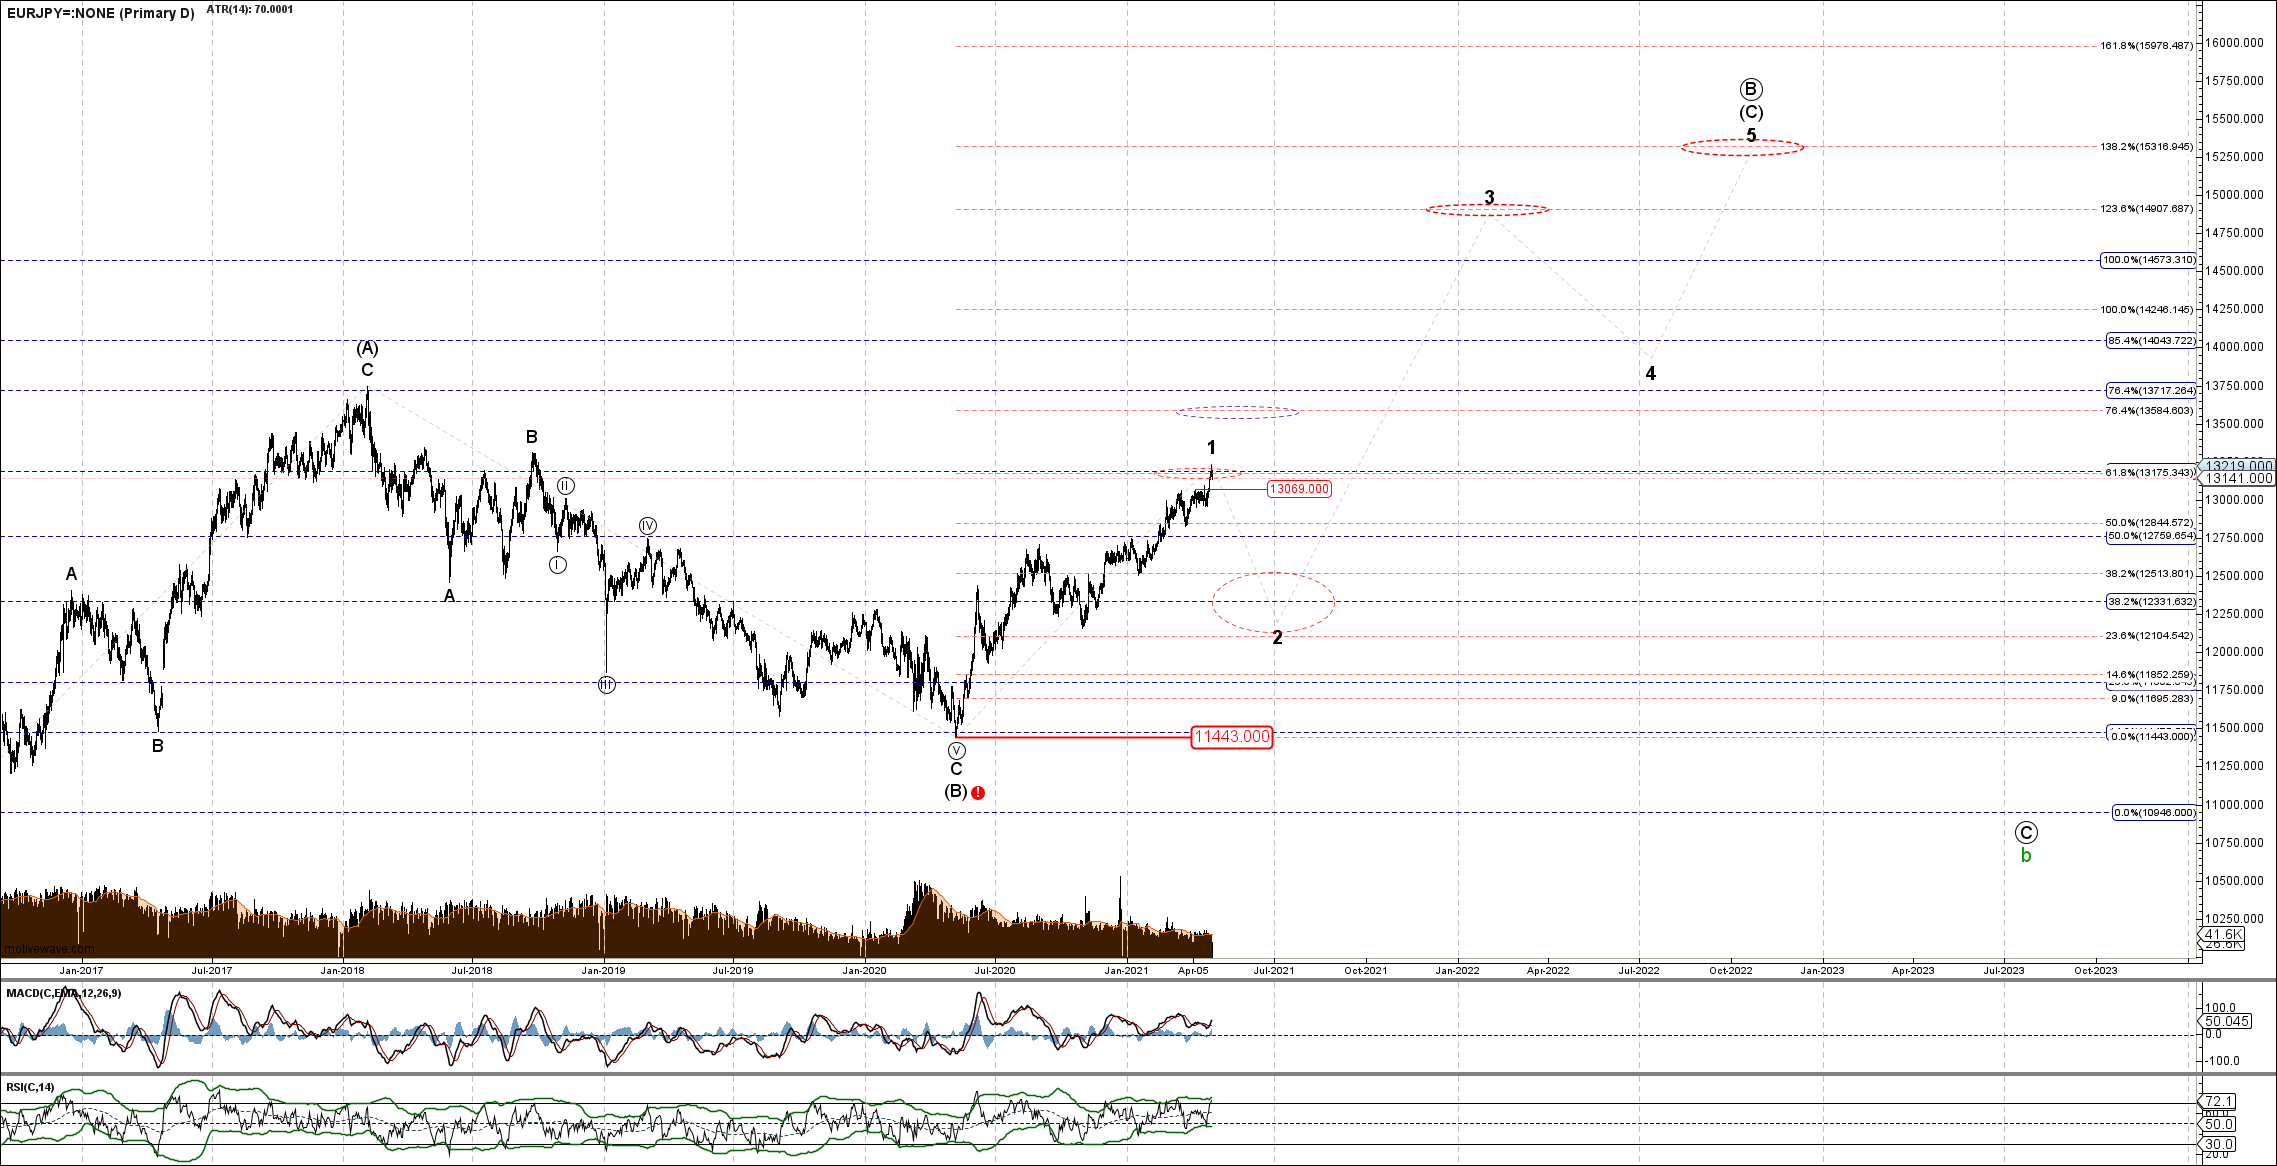 EURJPY= - Primary D - Apr-30 1428 PM (1 day)